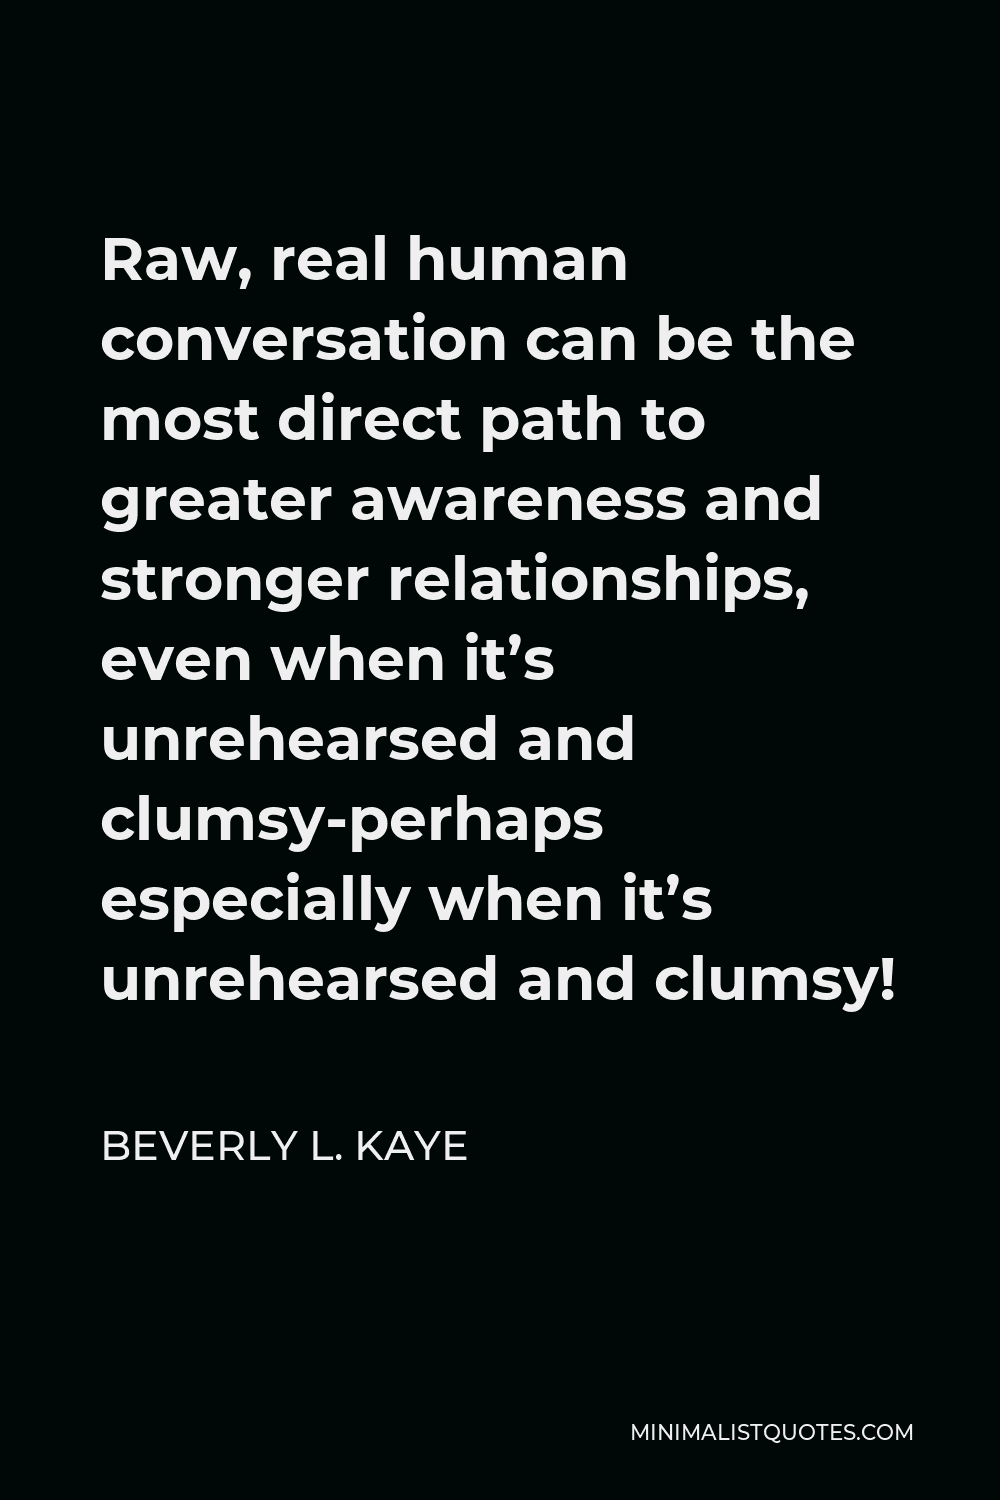 Beverly L. Kaye Quote - Raw, real human conversation can be the most direct path to greater awareness and stronger relationships, even when it’s unrehearsed and clumsy-perhaps especially when it’s unrehearsed and clumsy!